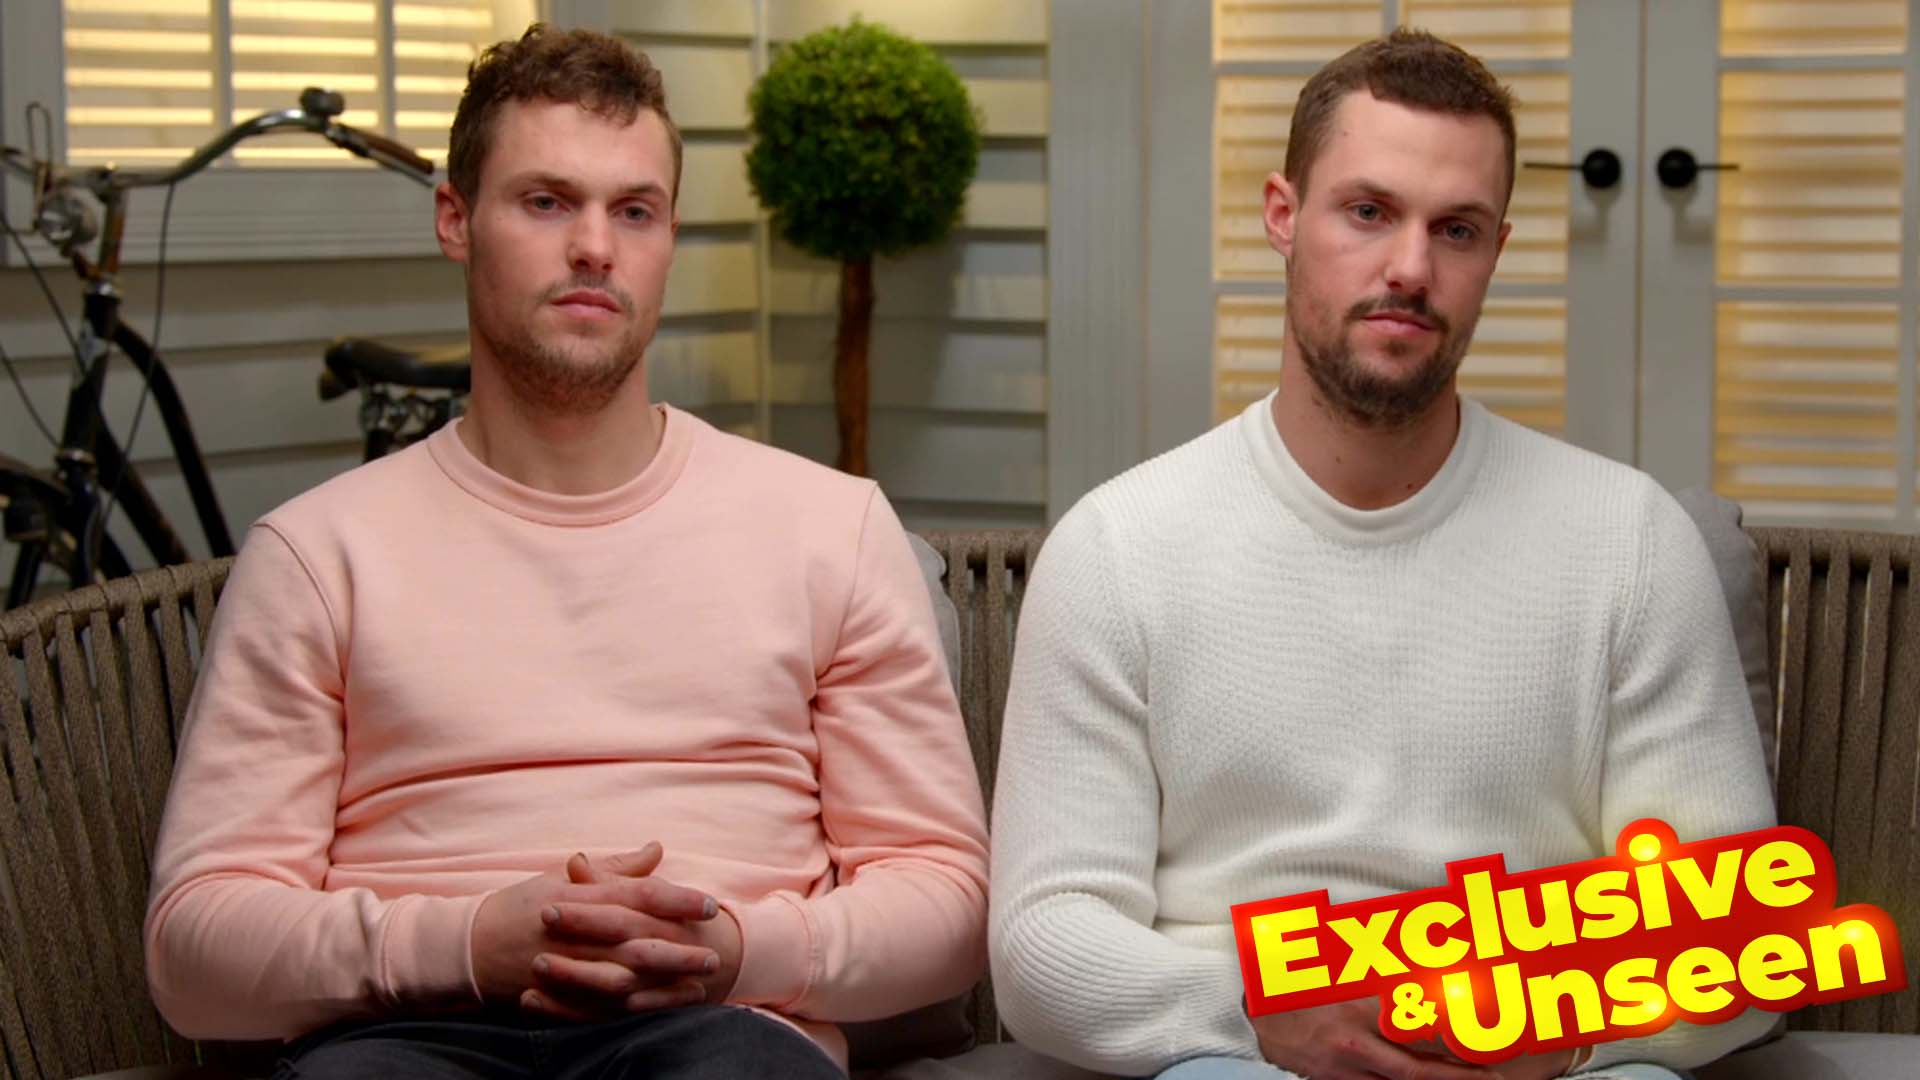 Exclusive: Josh and Luke's full tell-all interview about the cheating scandal